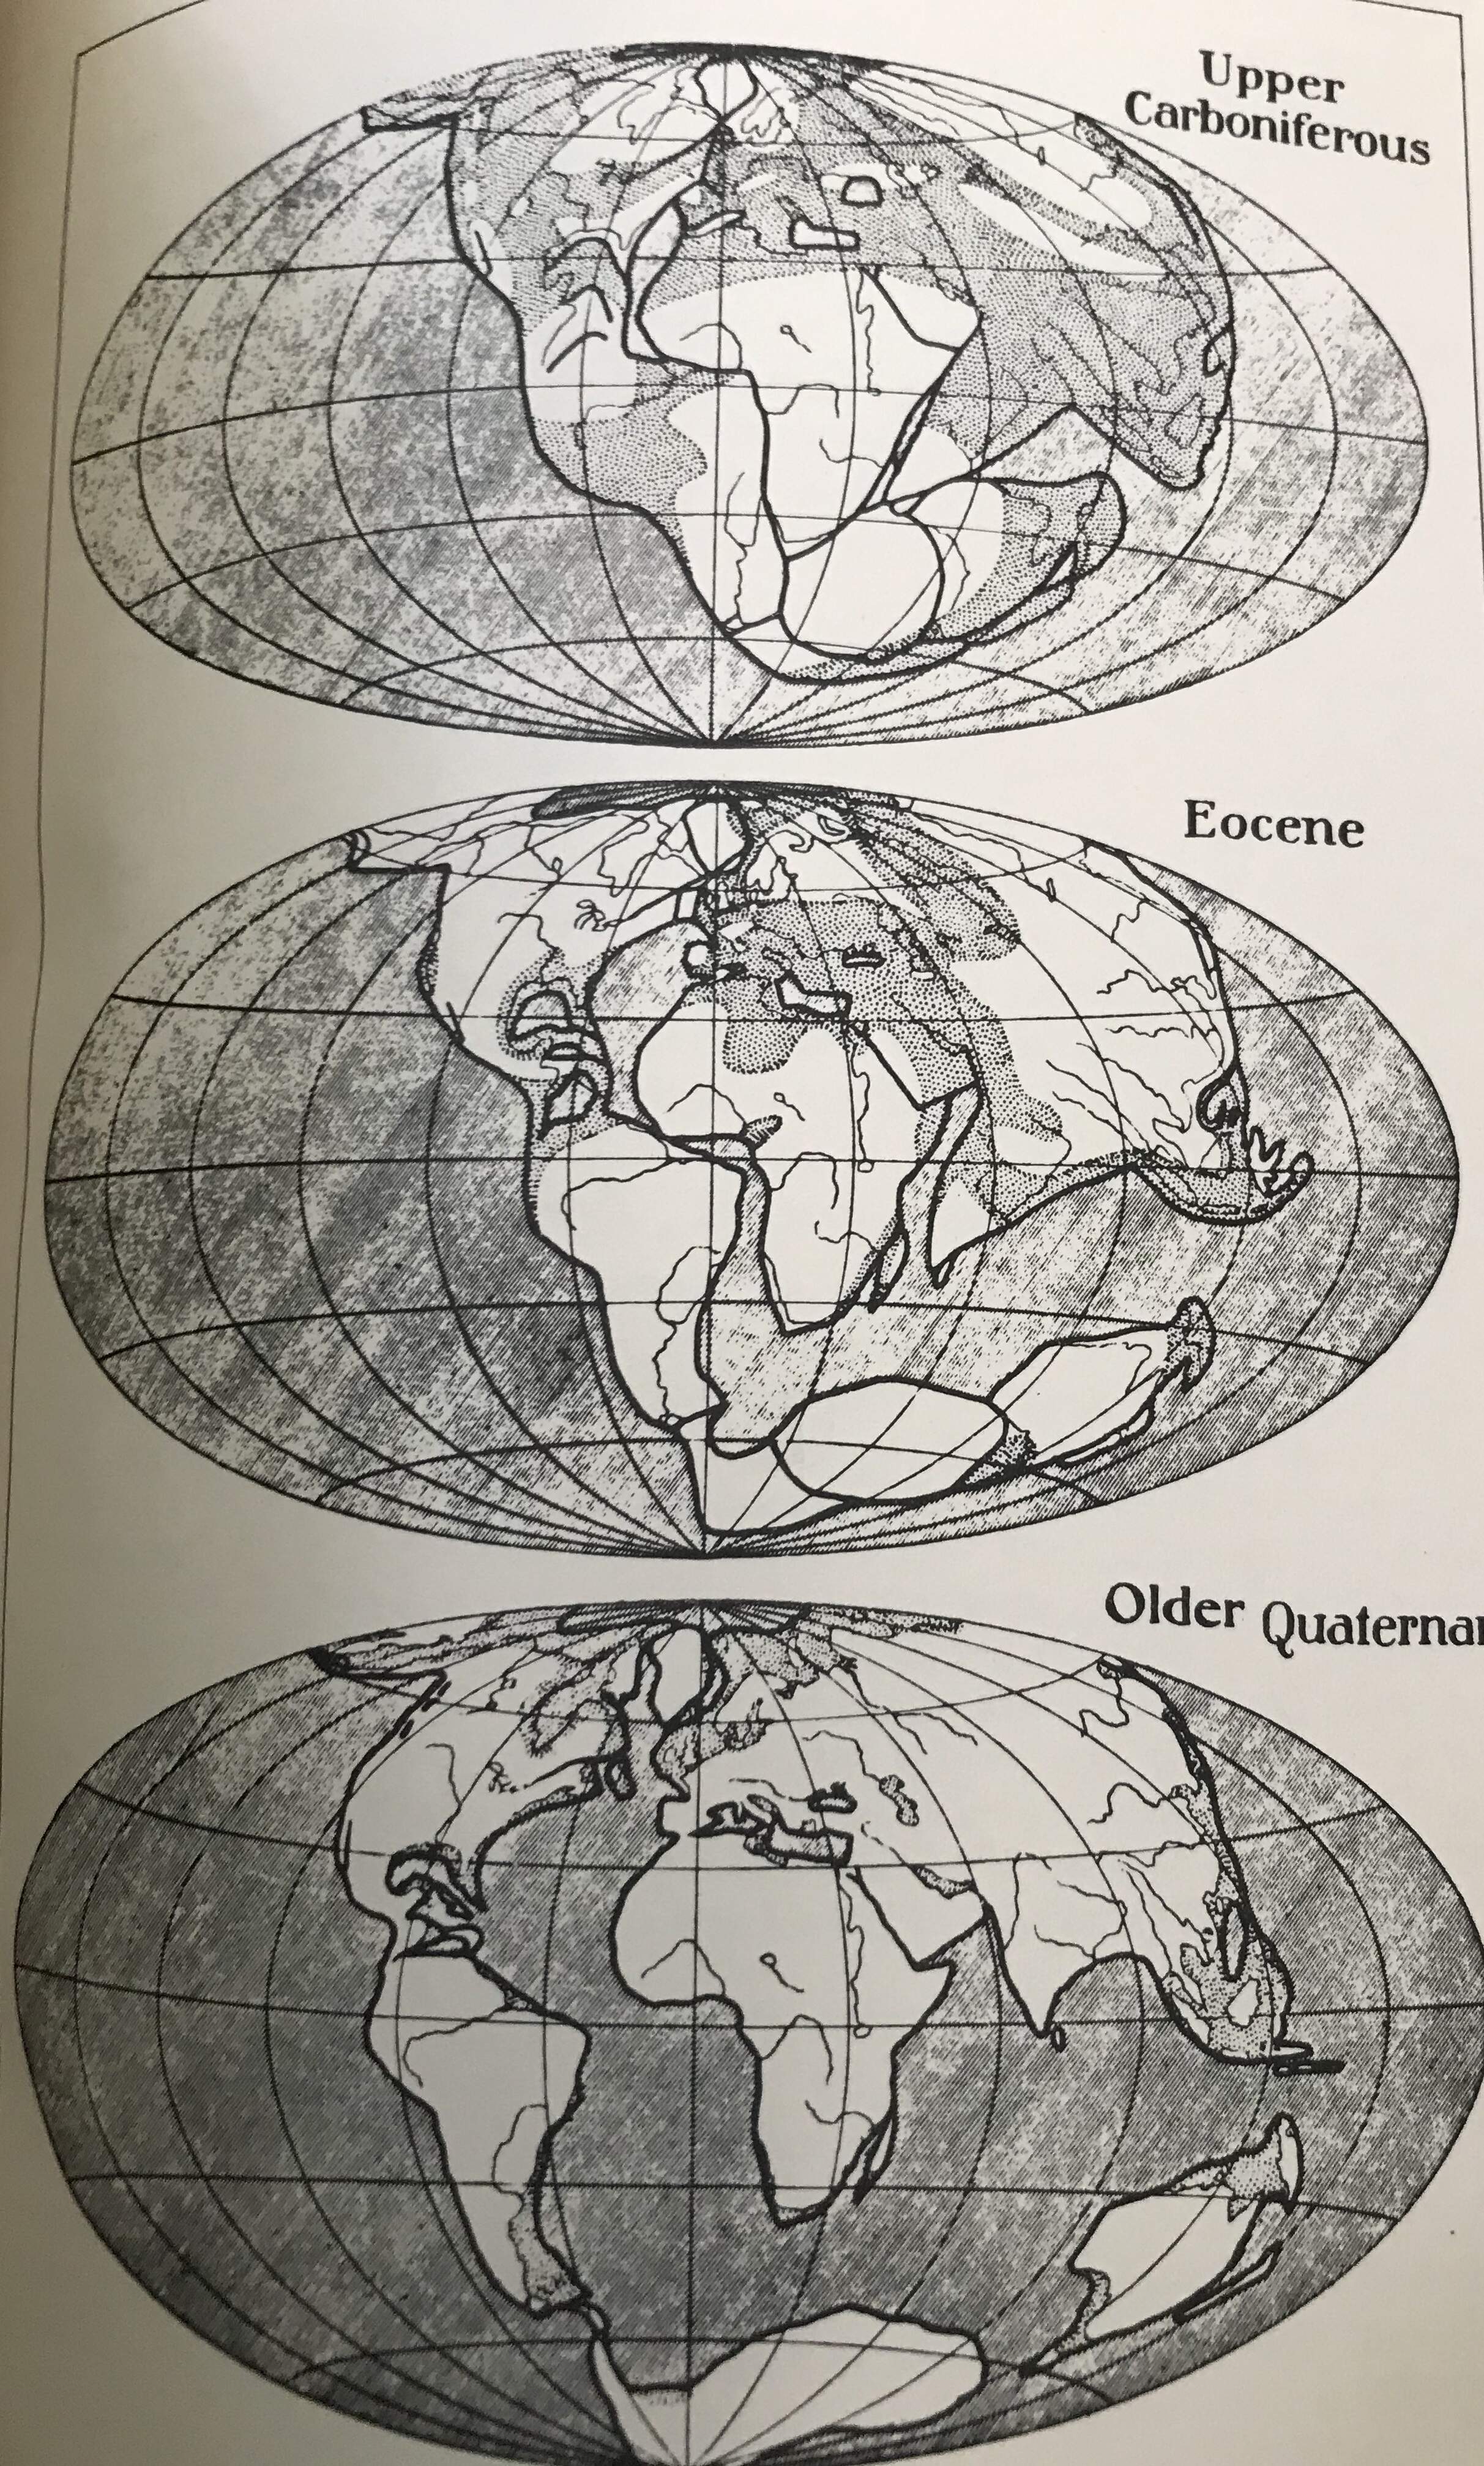 Terrestrial Theories, The Earth and their Bearing on the Geology of Egypt by W. F. Hume